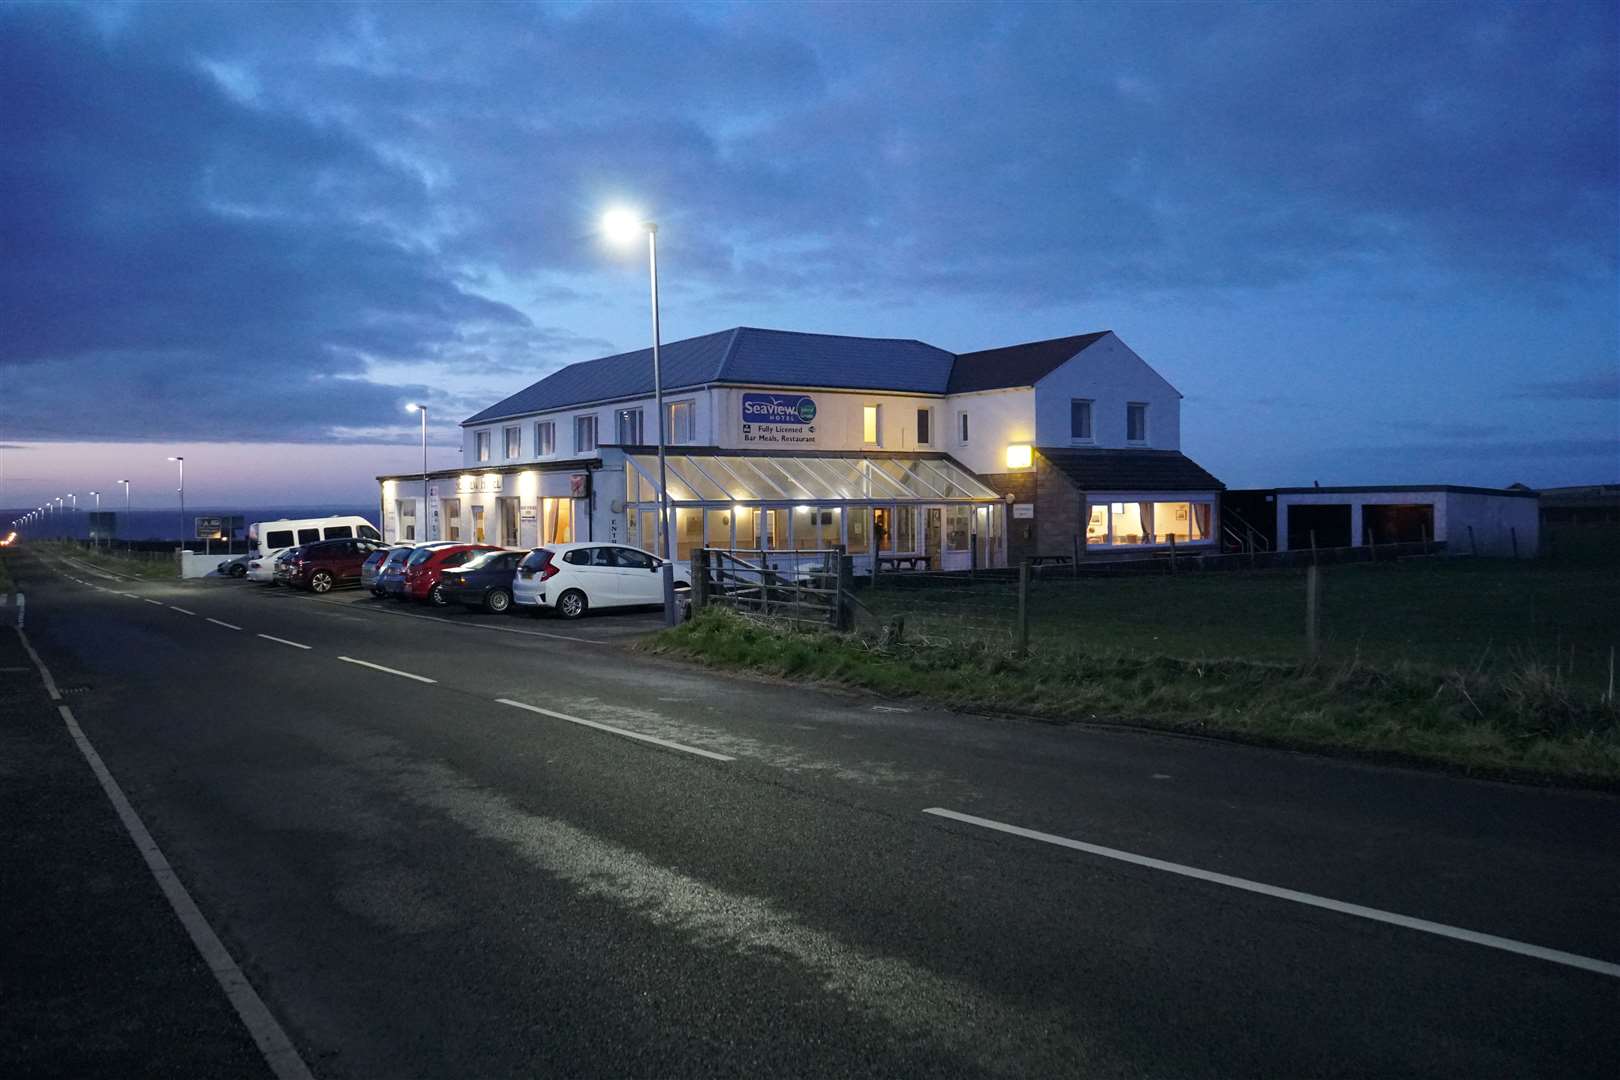 The Seaview Hotel owner, Andrew Mowat, was pleased with the increase in business after the easing of restrictions.